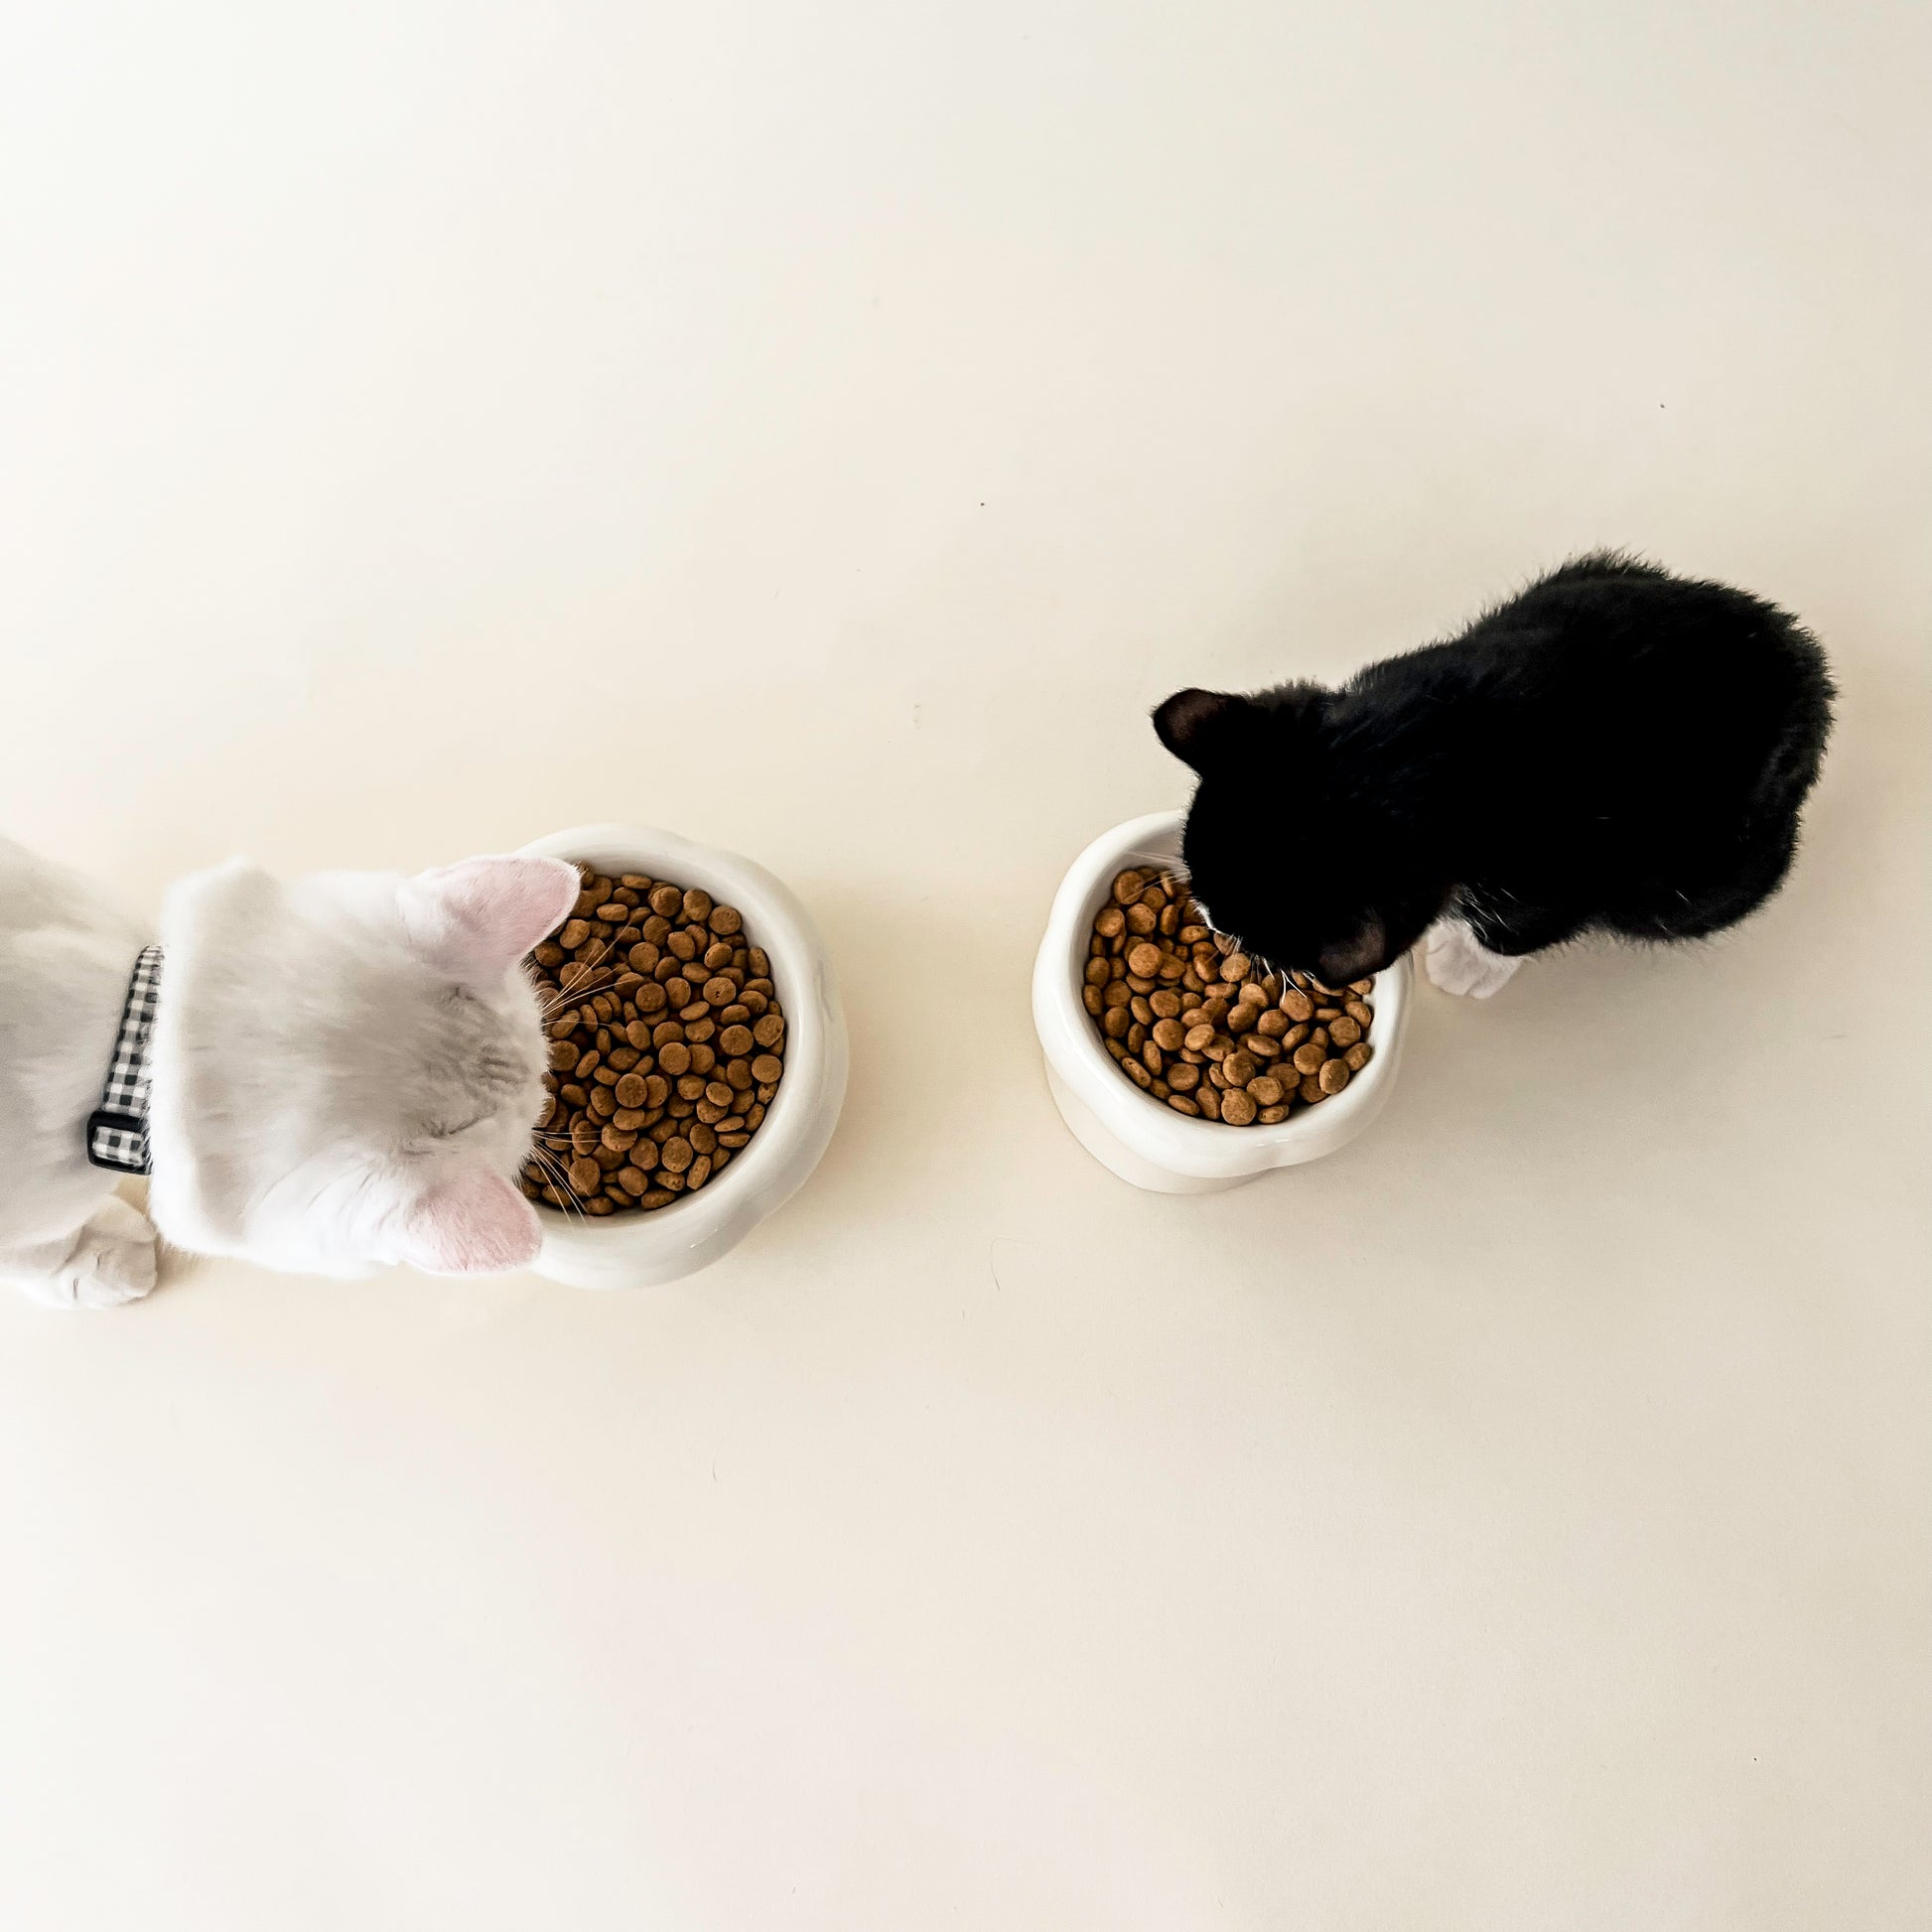 Cats eating in Bloire Creamy Food Bowl